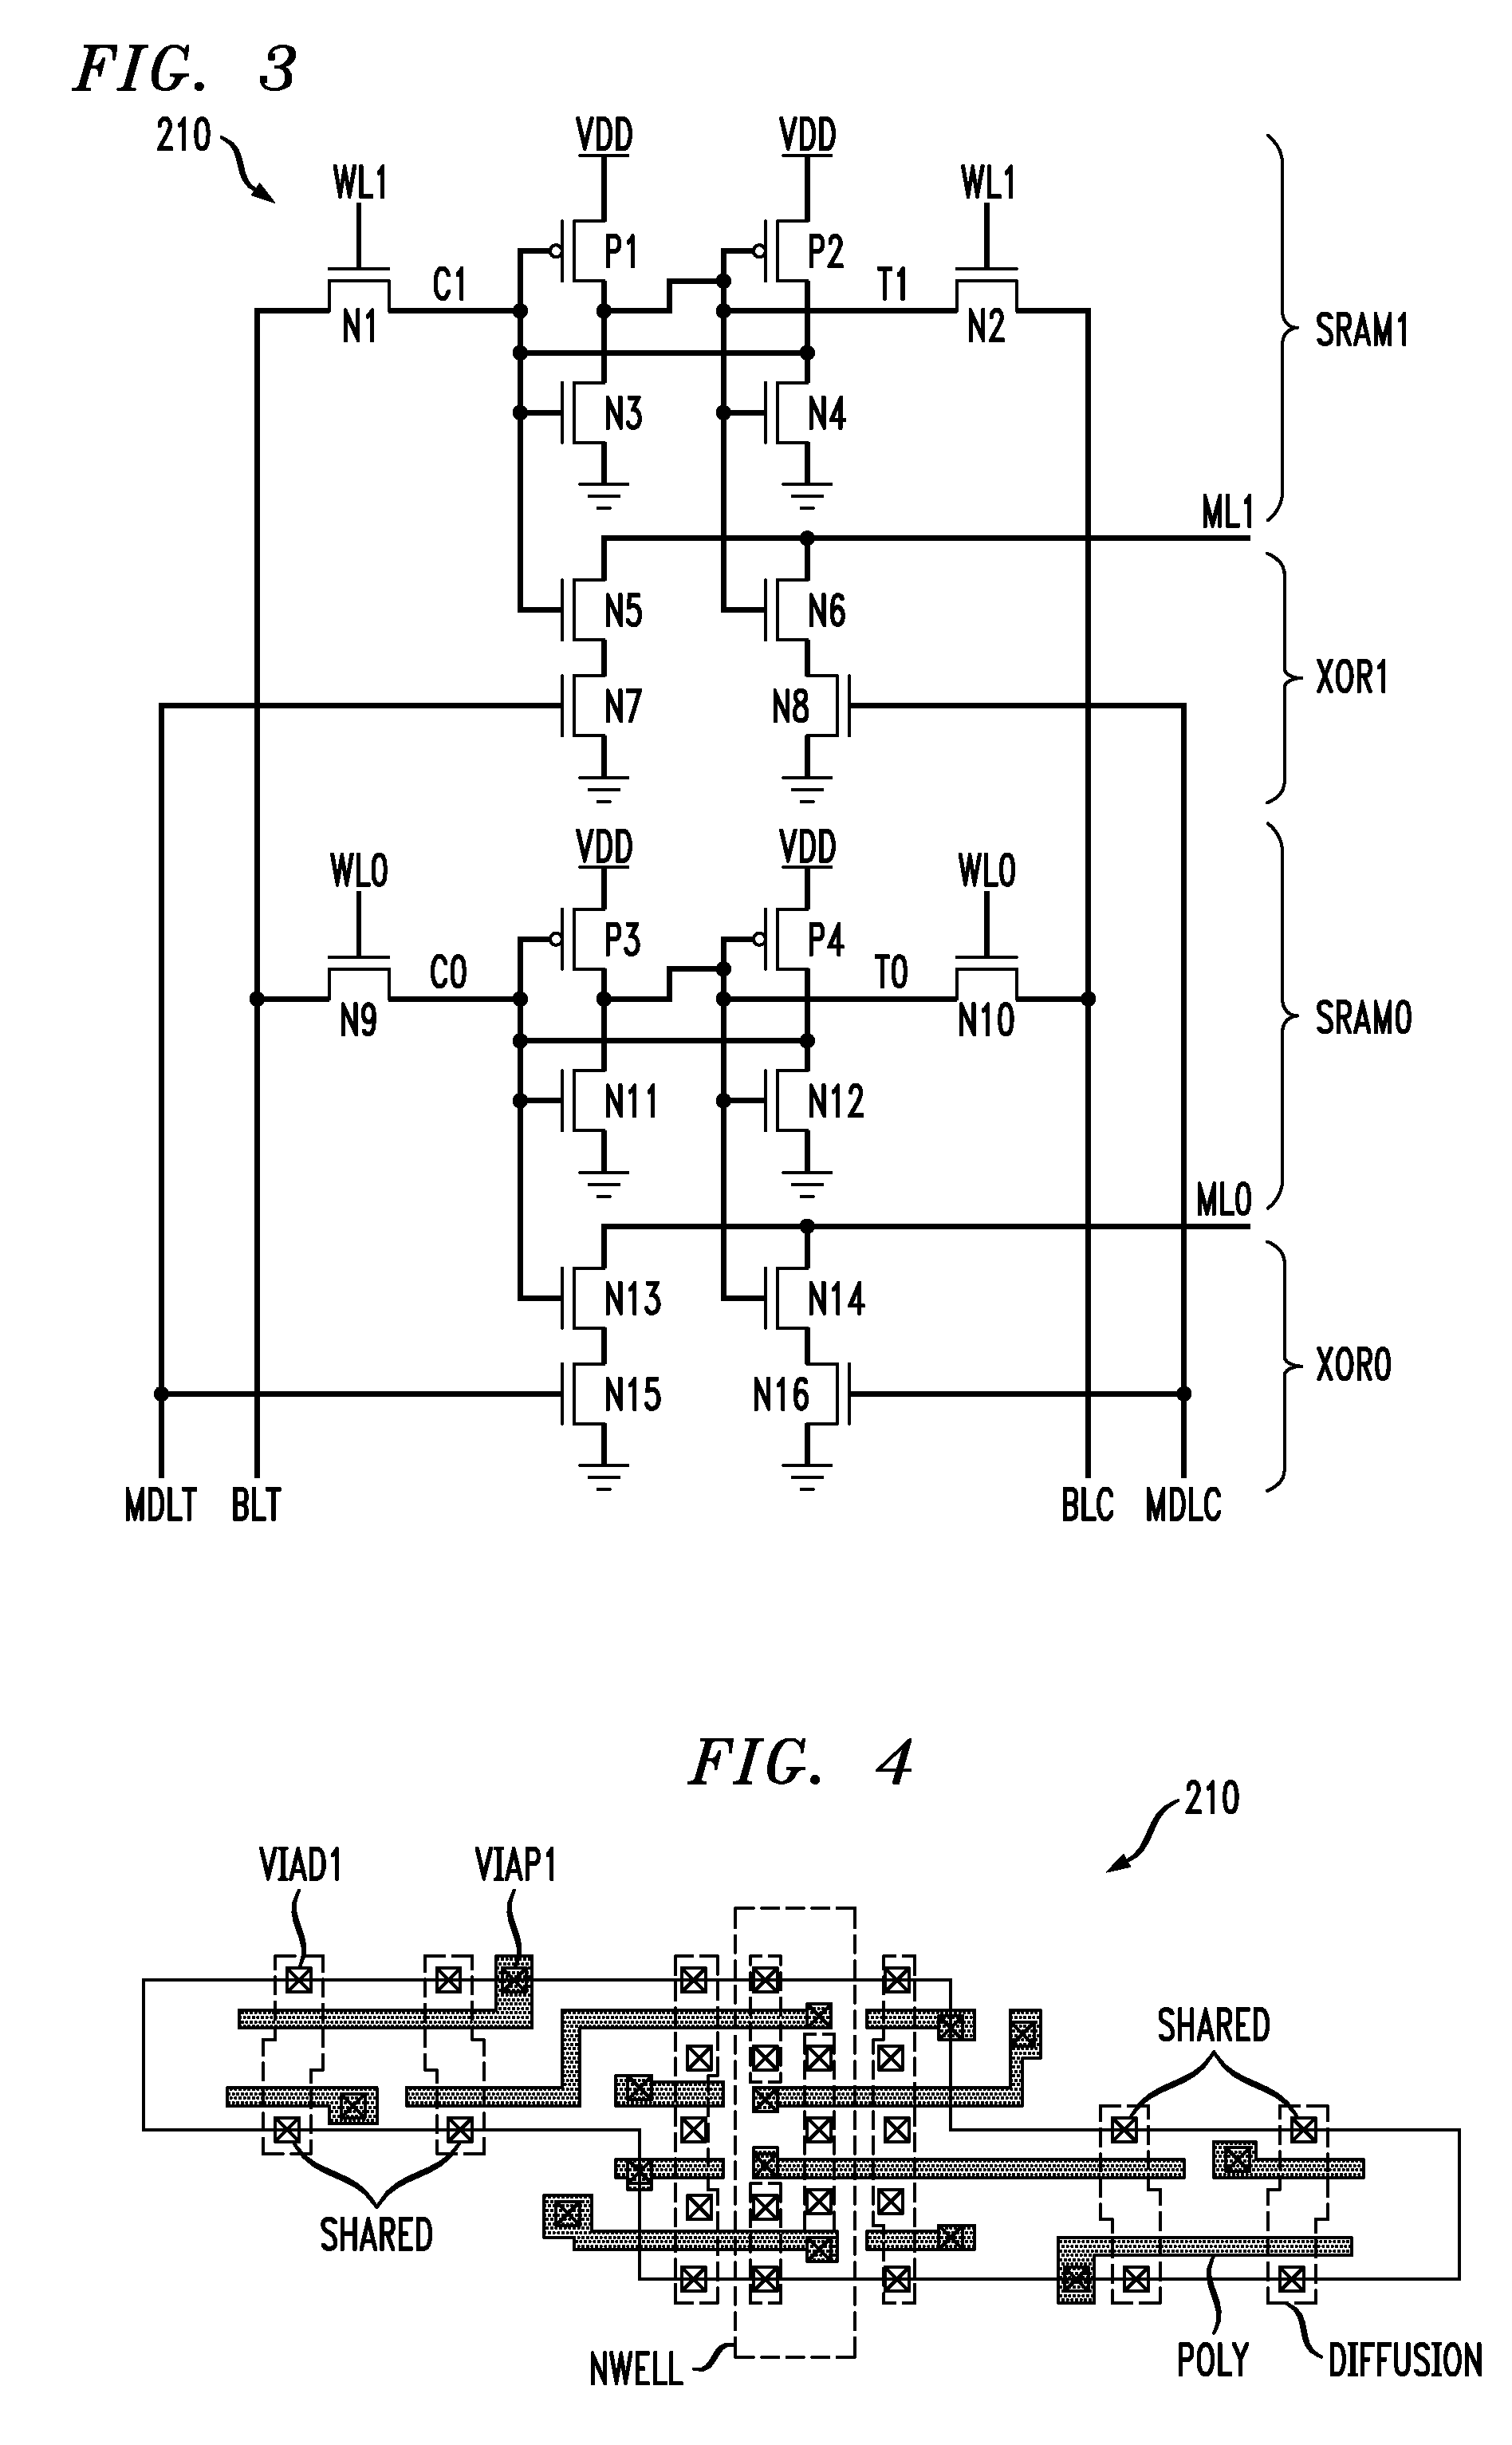 Memory Cell for Content-Addressable Memory